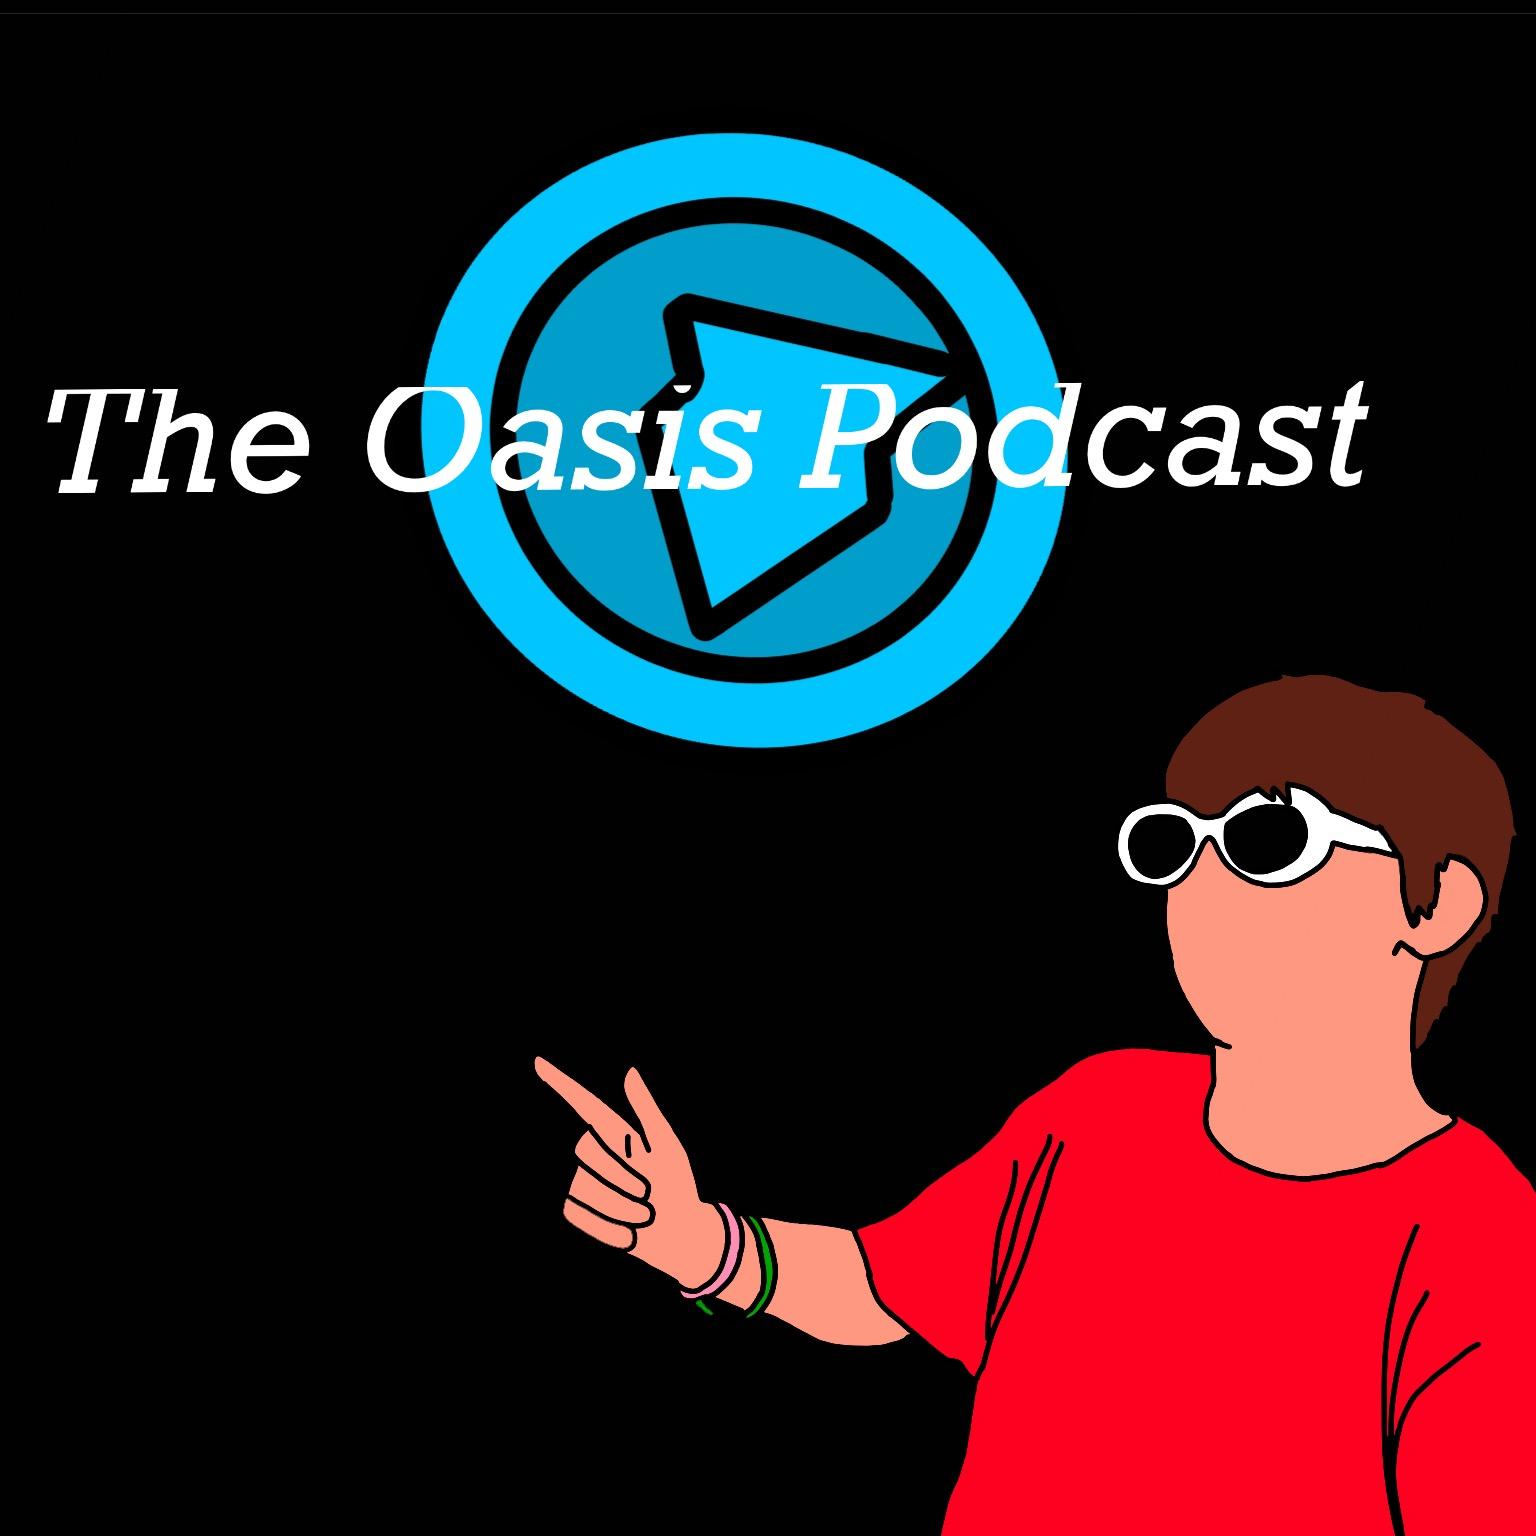 The Oasis Podcast